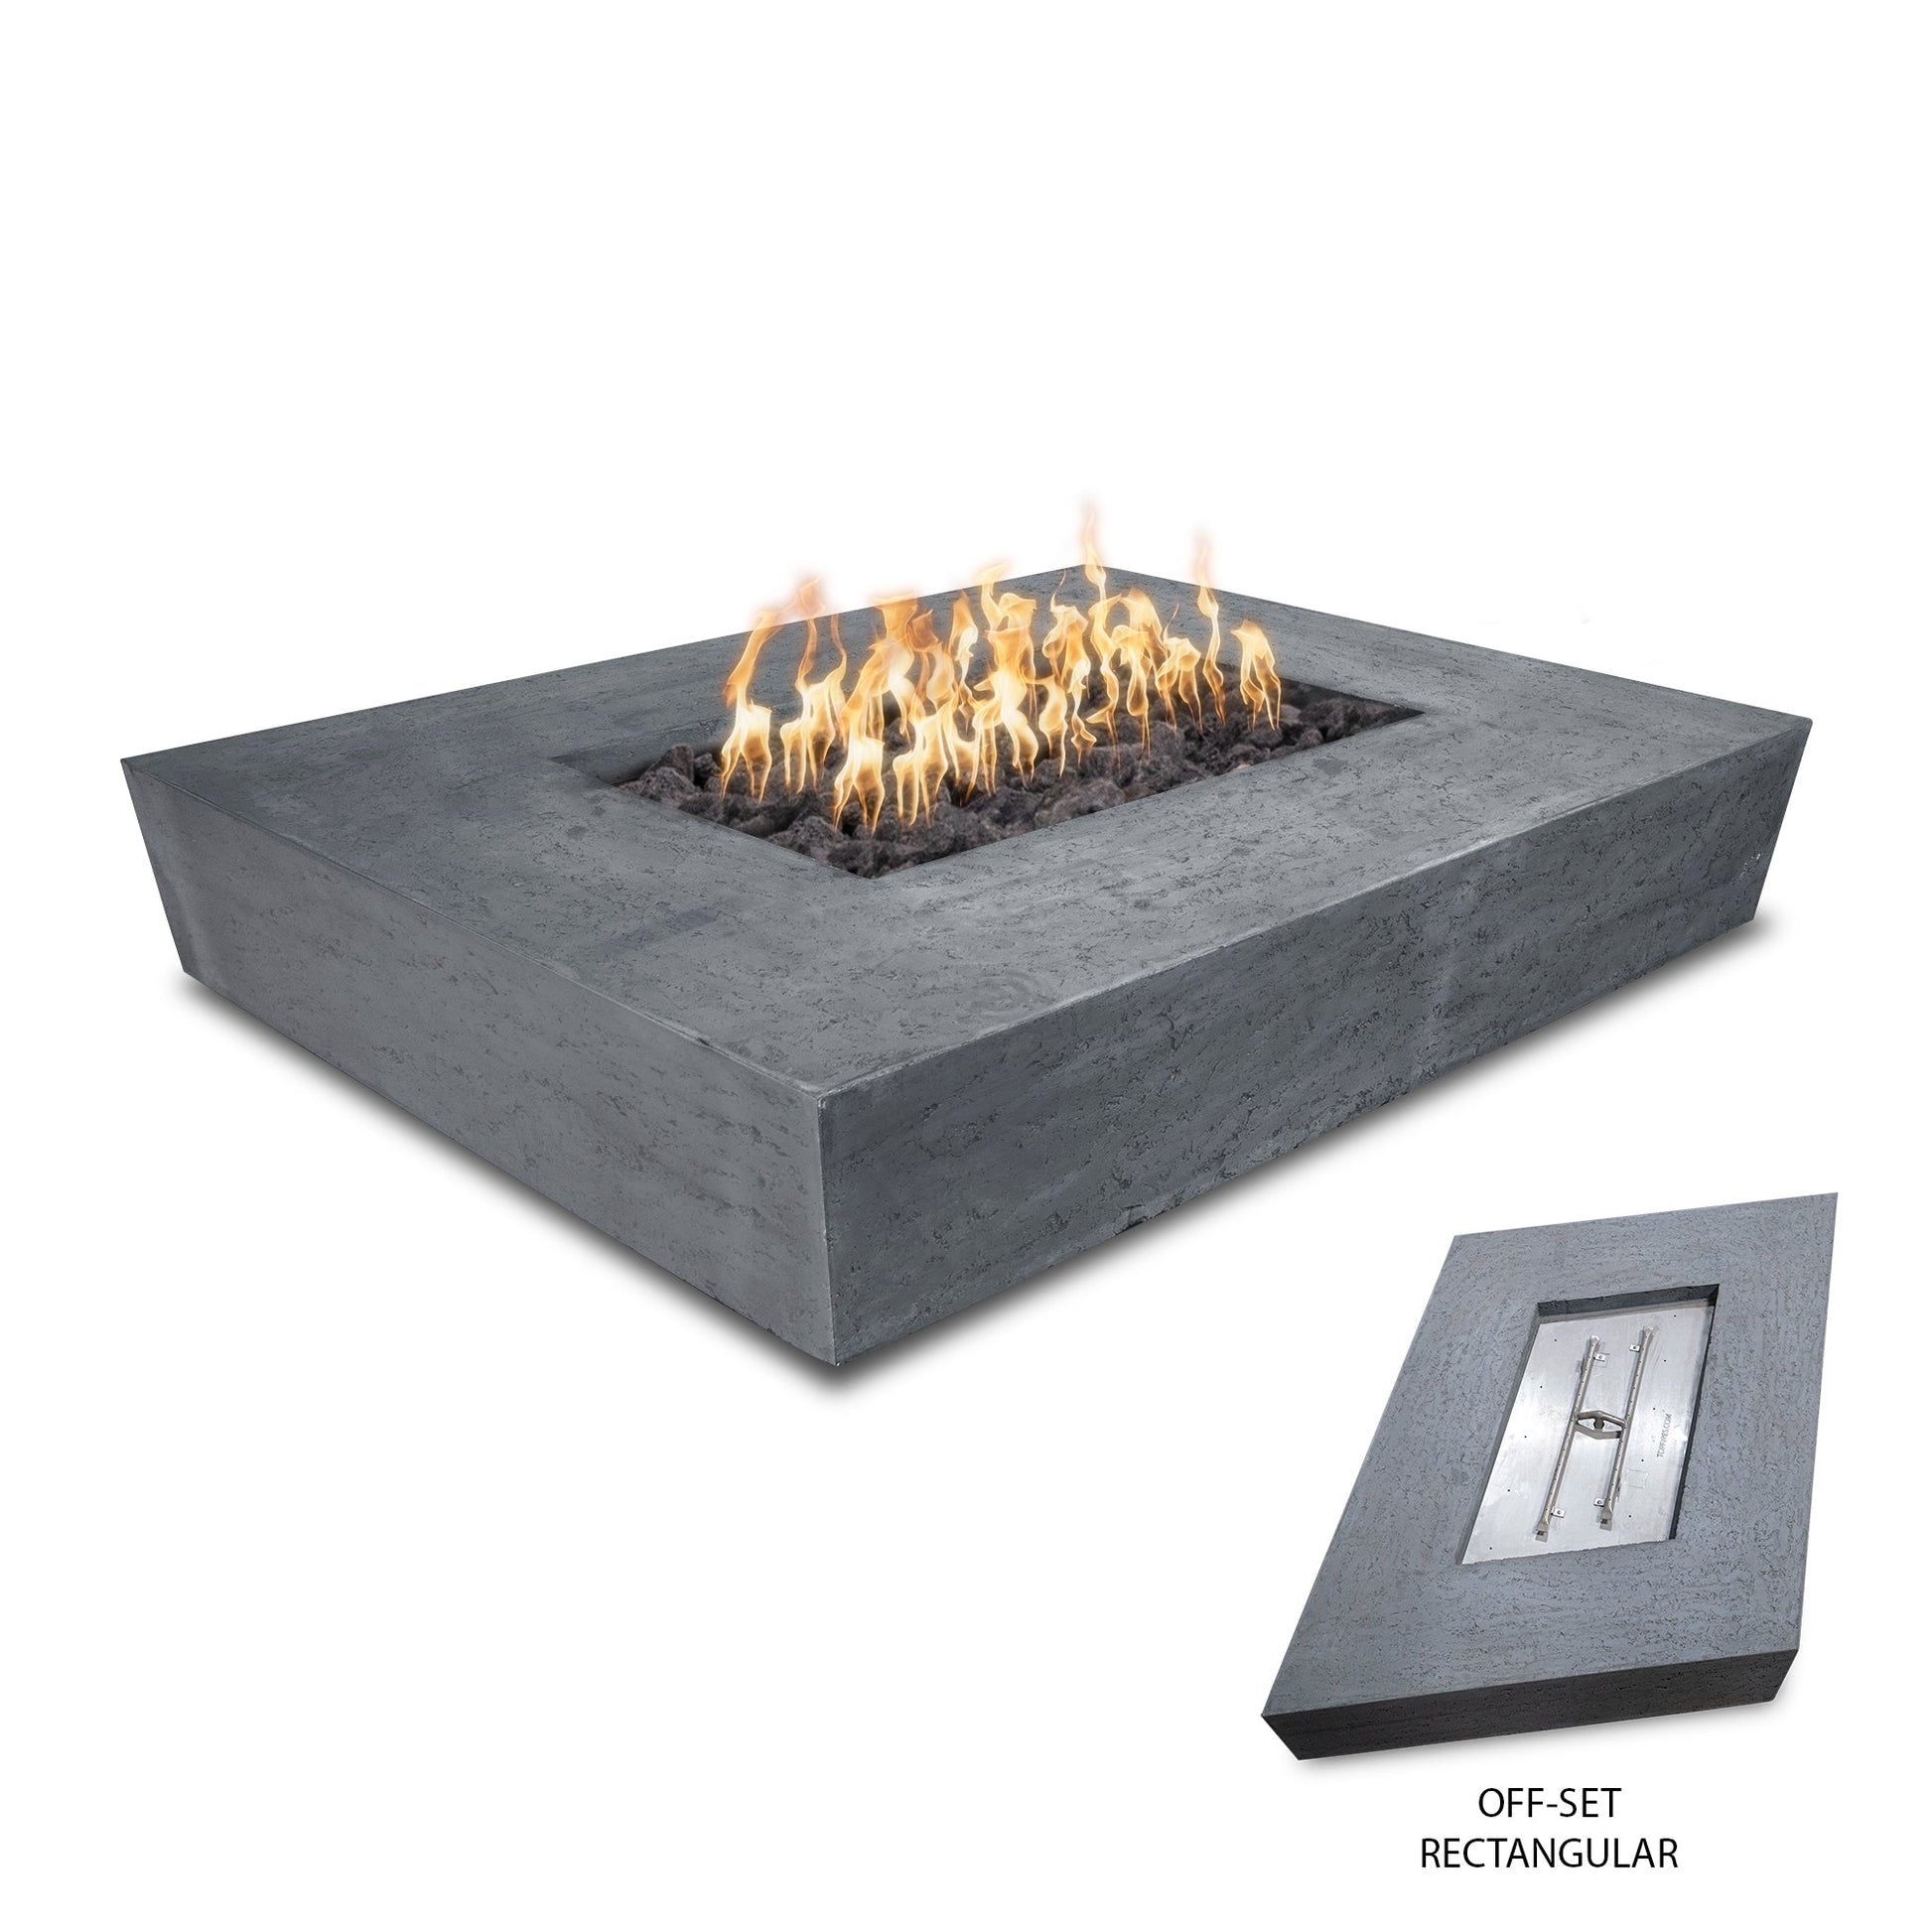 The Outdoor Plus Rectangular Heiko 58" Rustic White GFRC Concrete Liquid Propane Fire Pit with 12V Electronic Ignition